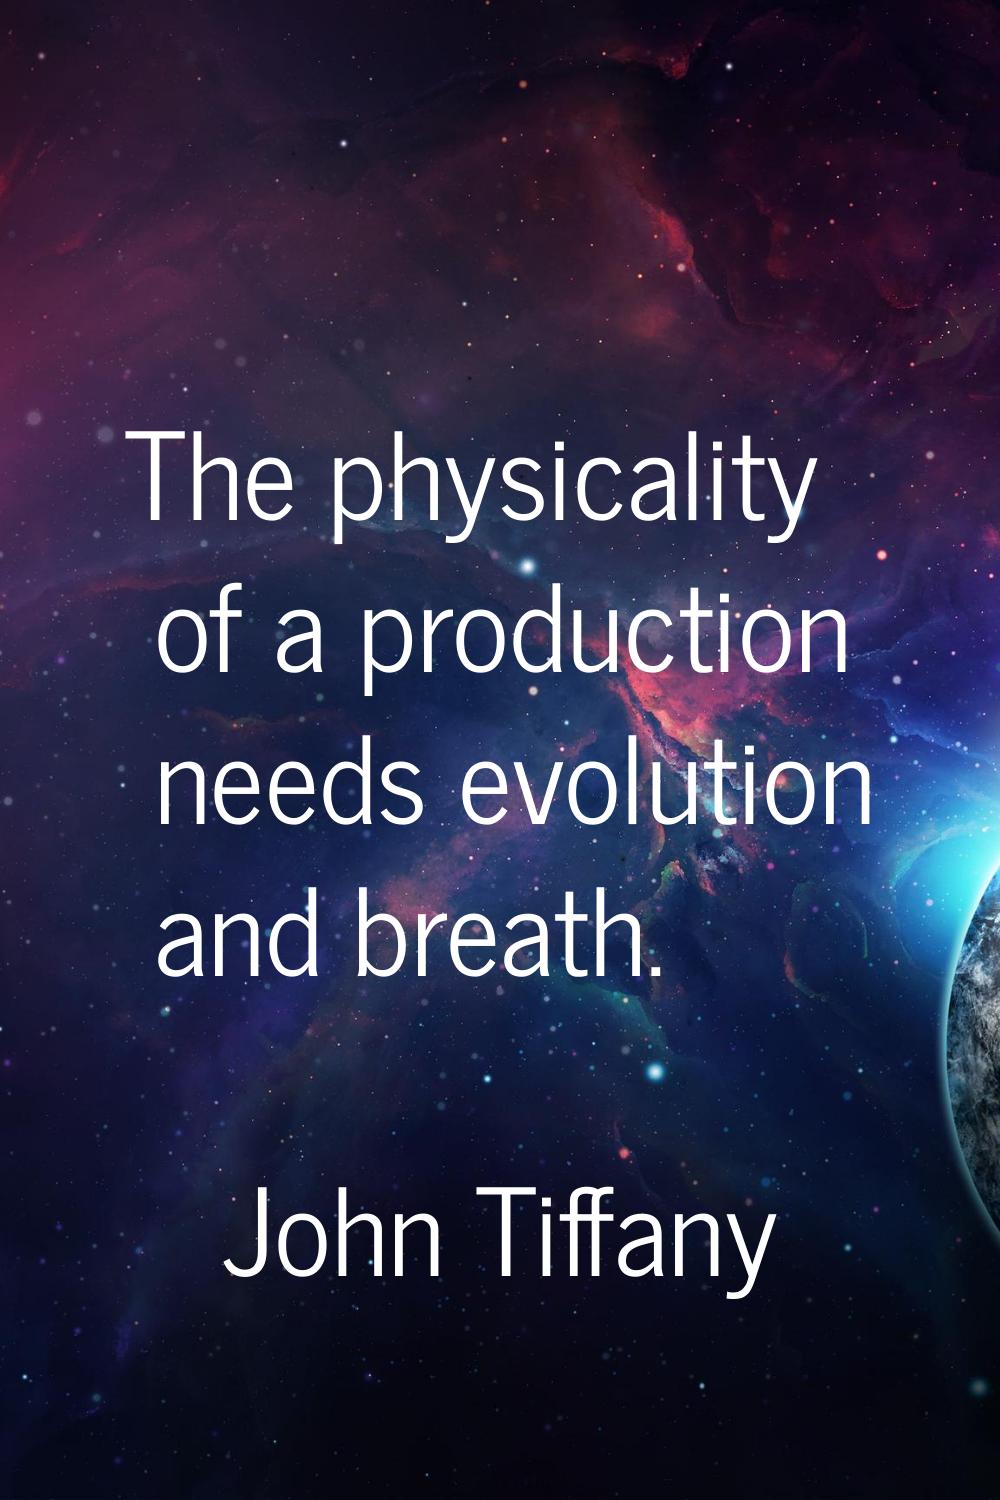 The physicality of a production needs evolution and breath.